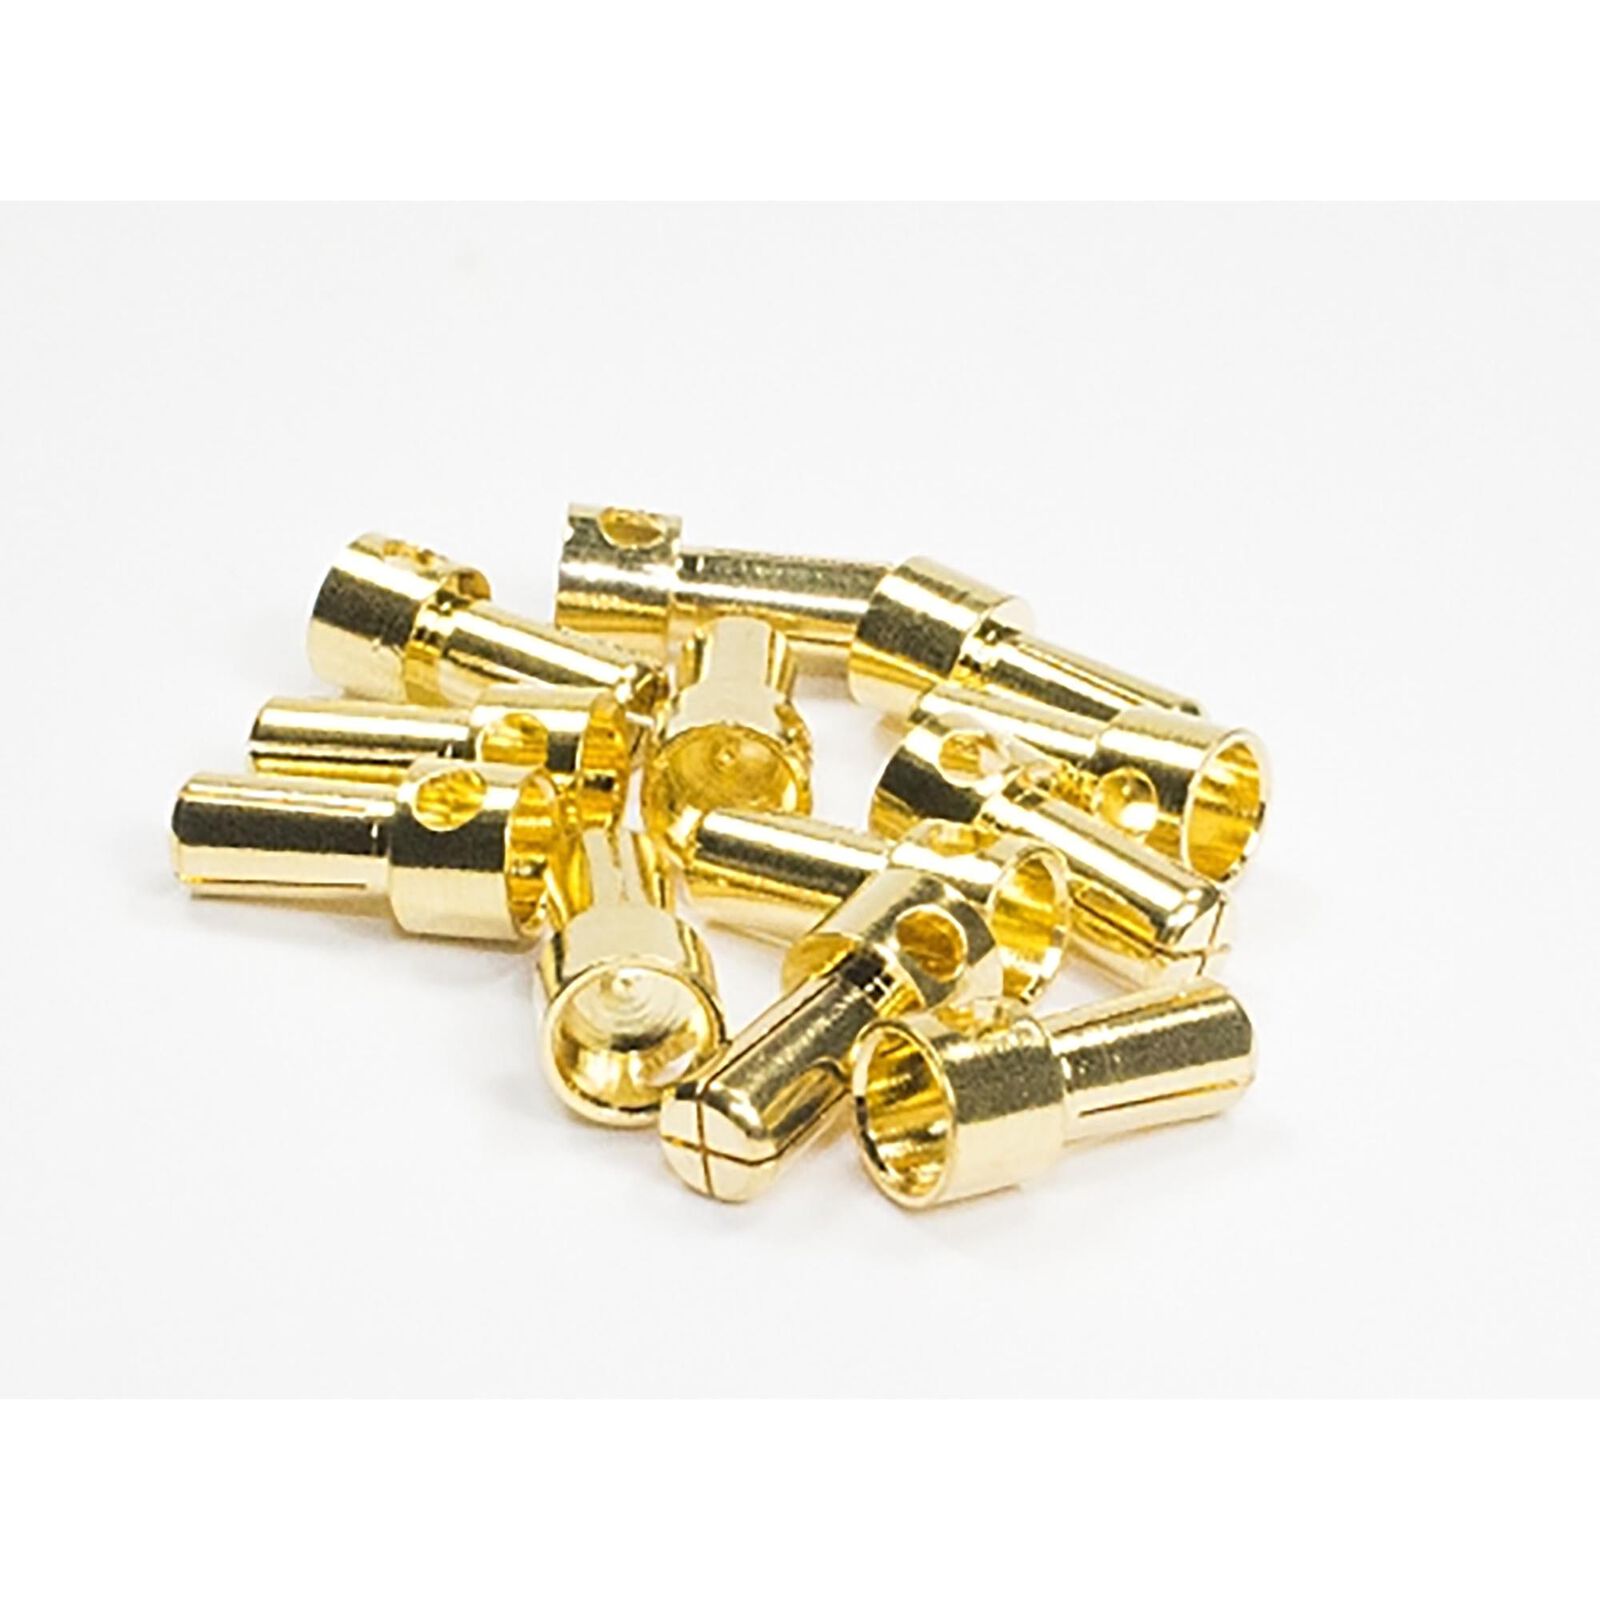 5mm Gold Plated Bullet Connector, Male (12)